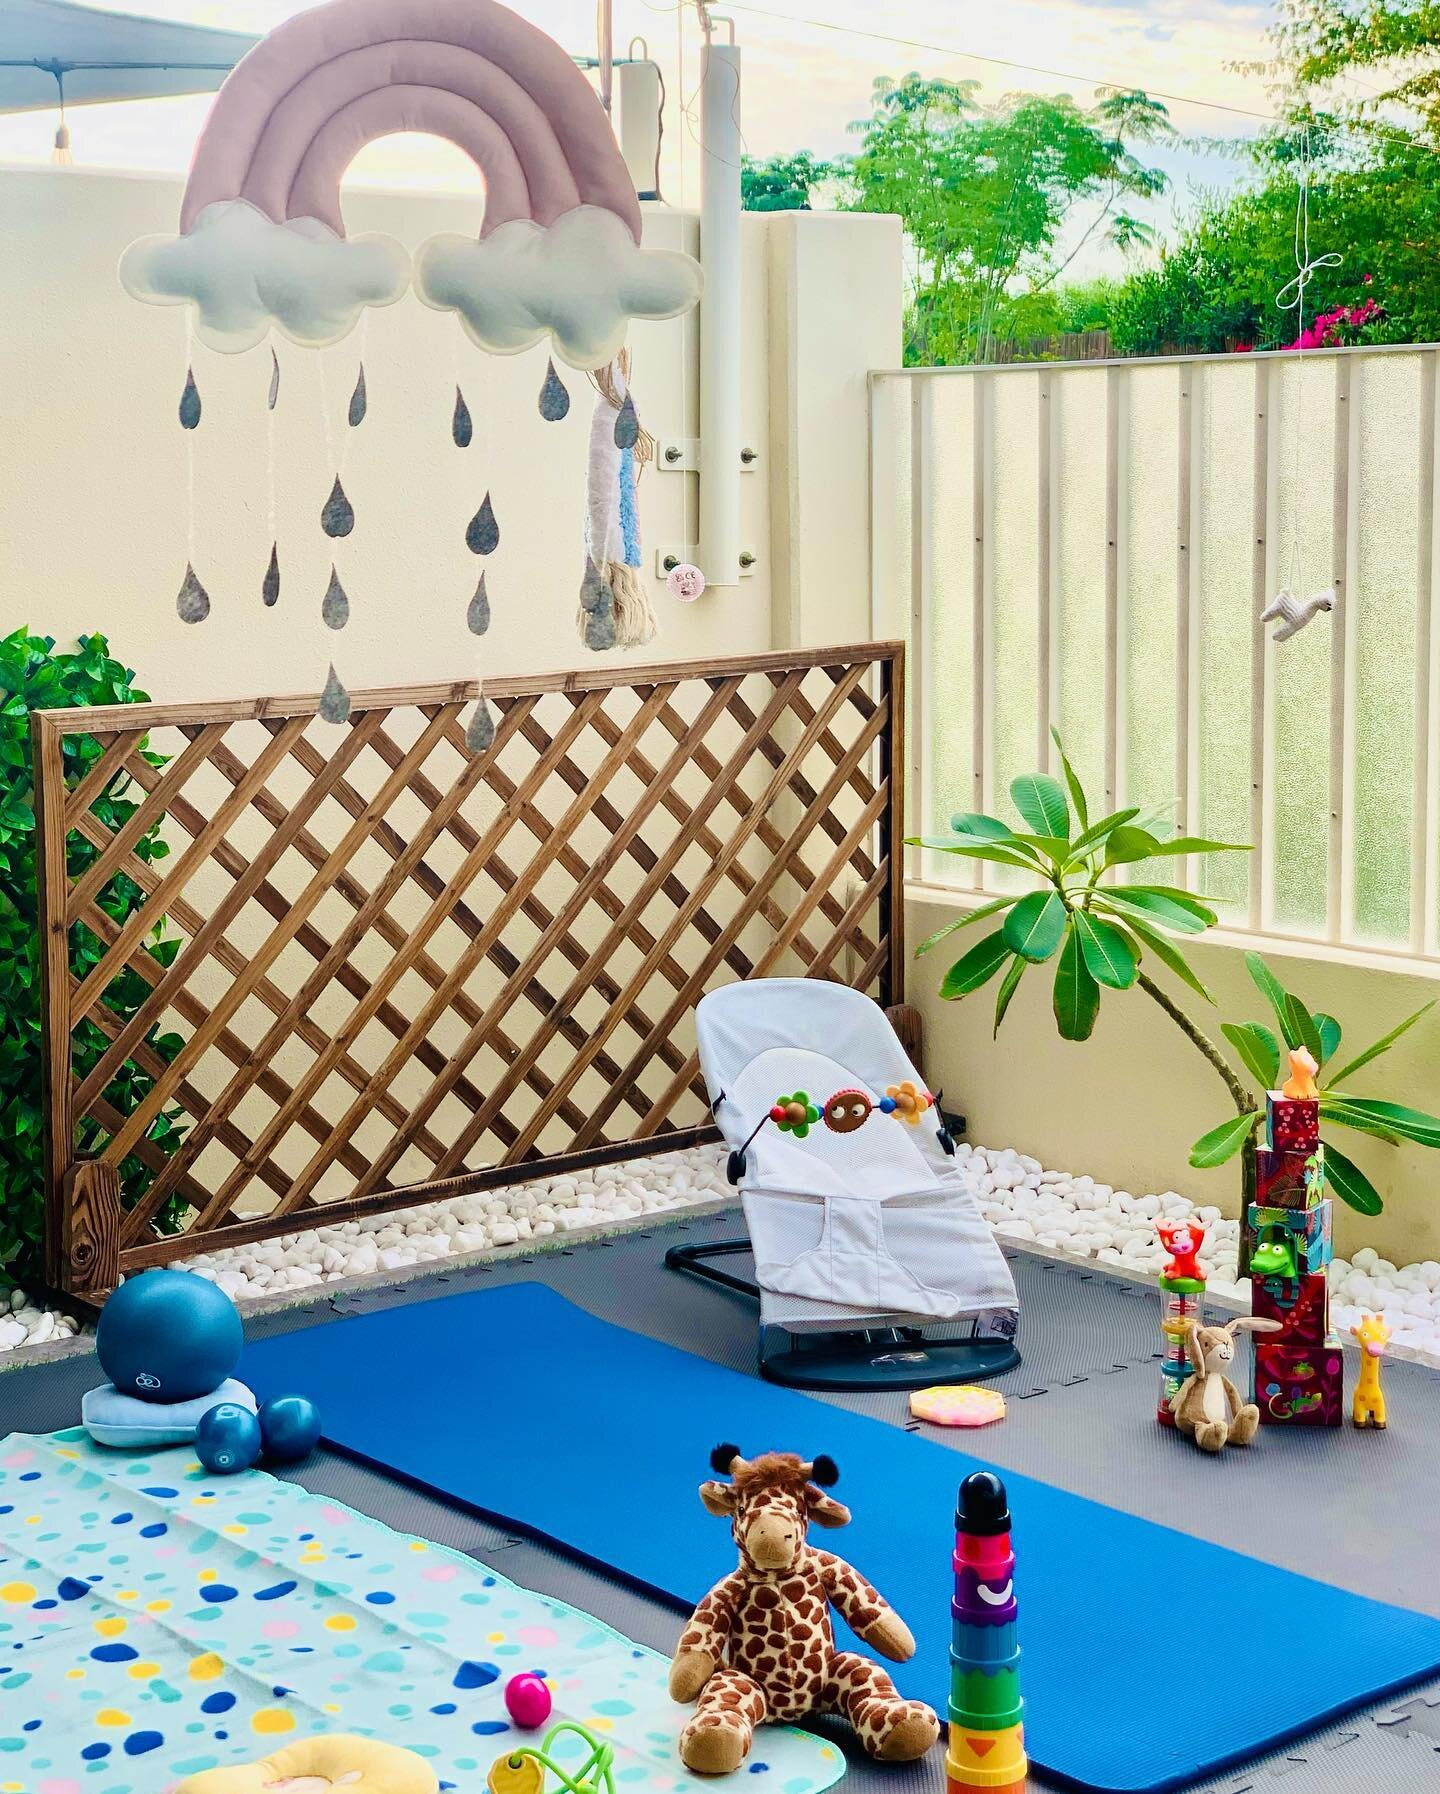 NEW POSTNATAL PILATES COURSE DUBAI HILLS

TUESDAY 
17th Jan - 7th Feb 
9AM 

&ldquo;Cordelia and I came to our first Baby &amp; Me class when she was eight weeks old, and it has been a favourite part of our week ever since. 

Laura is a brilliant tea